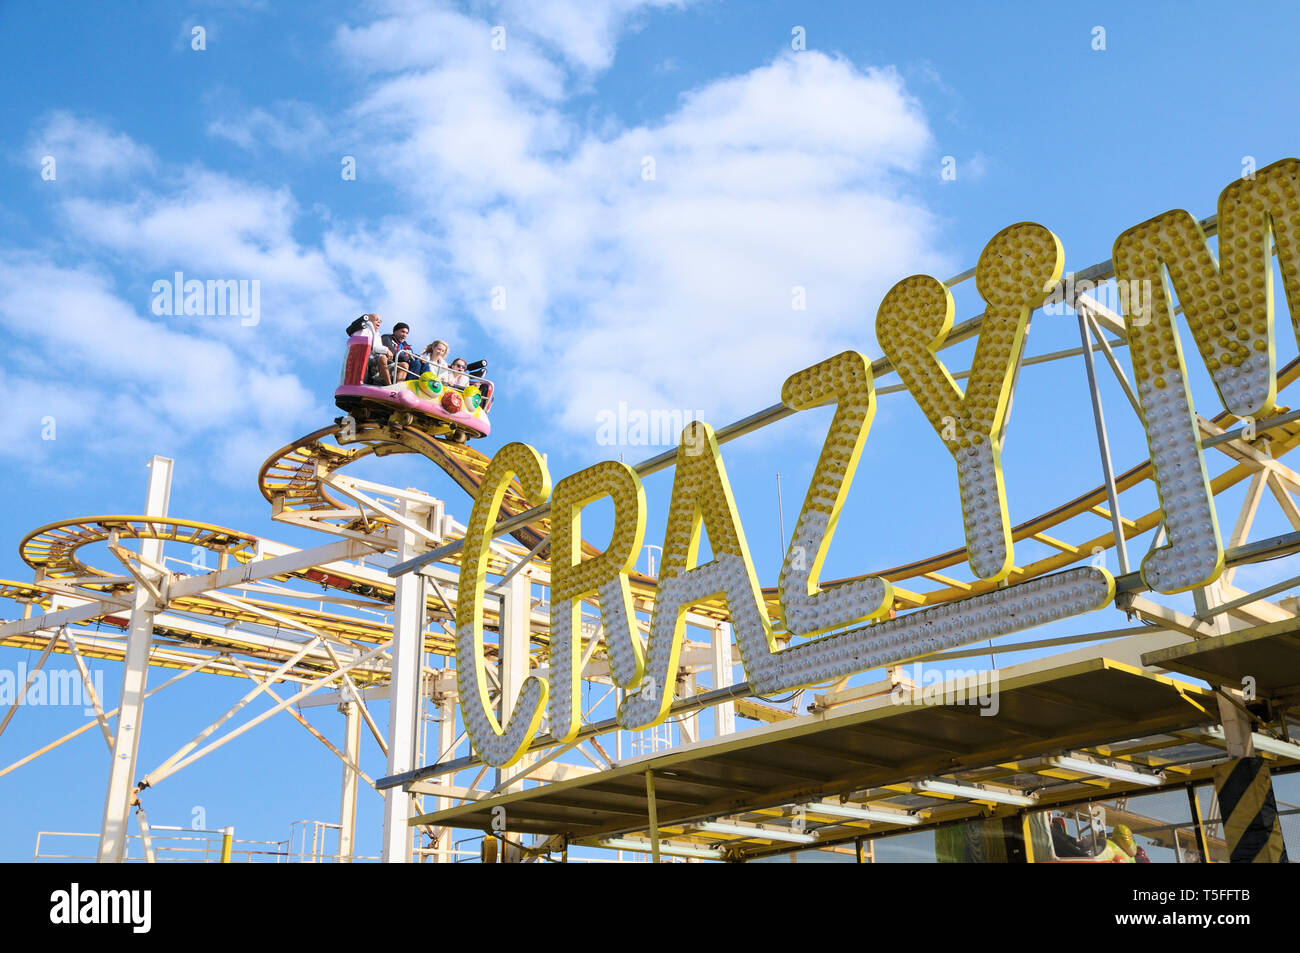 People enjoying the Crazy Mouse rollercoaster fairground ride at Brighton funfair, Brighton Palace Pier, East Sussex, England, UK Stock Photo